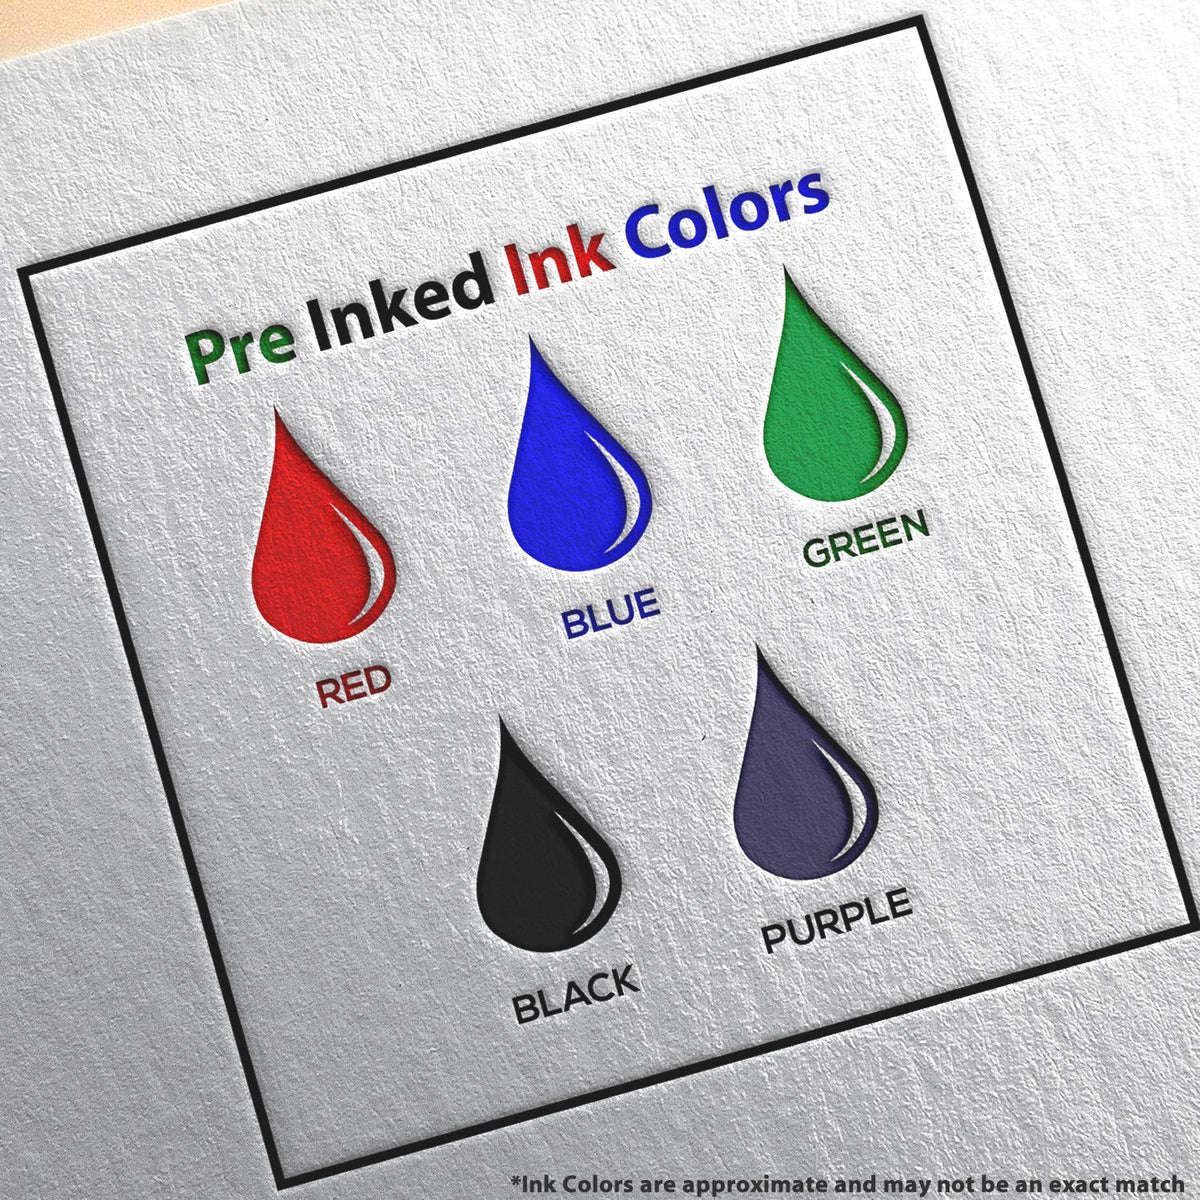 A picture showing the different ink colors or hues available for the Super Slim Colorado Notary Public Stamp product.